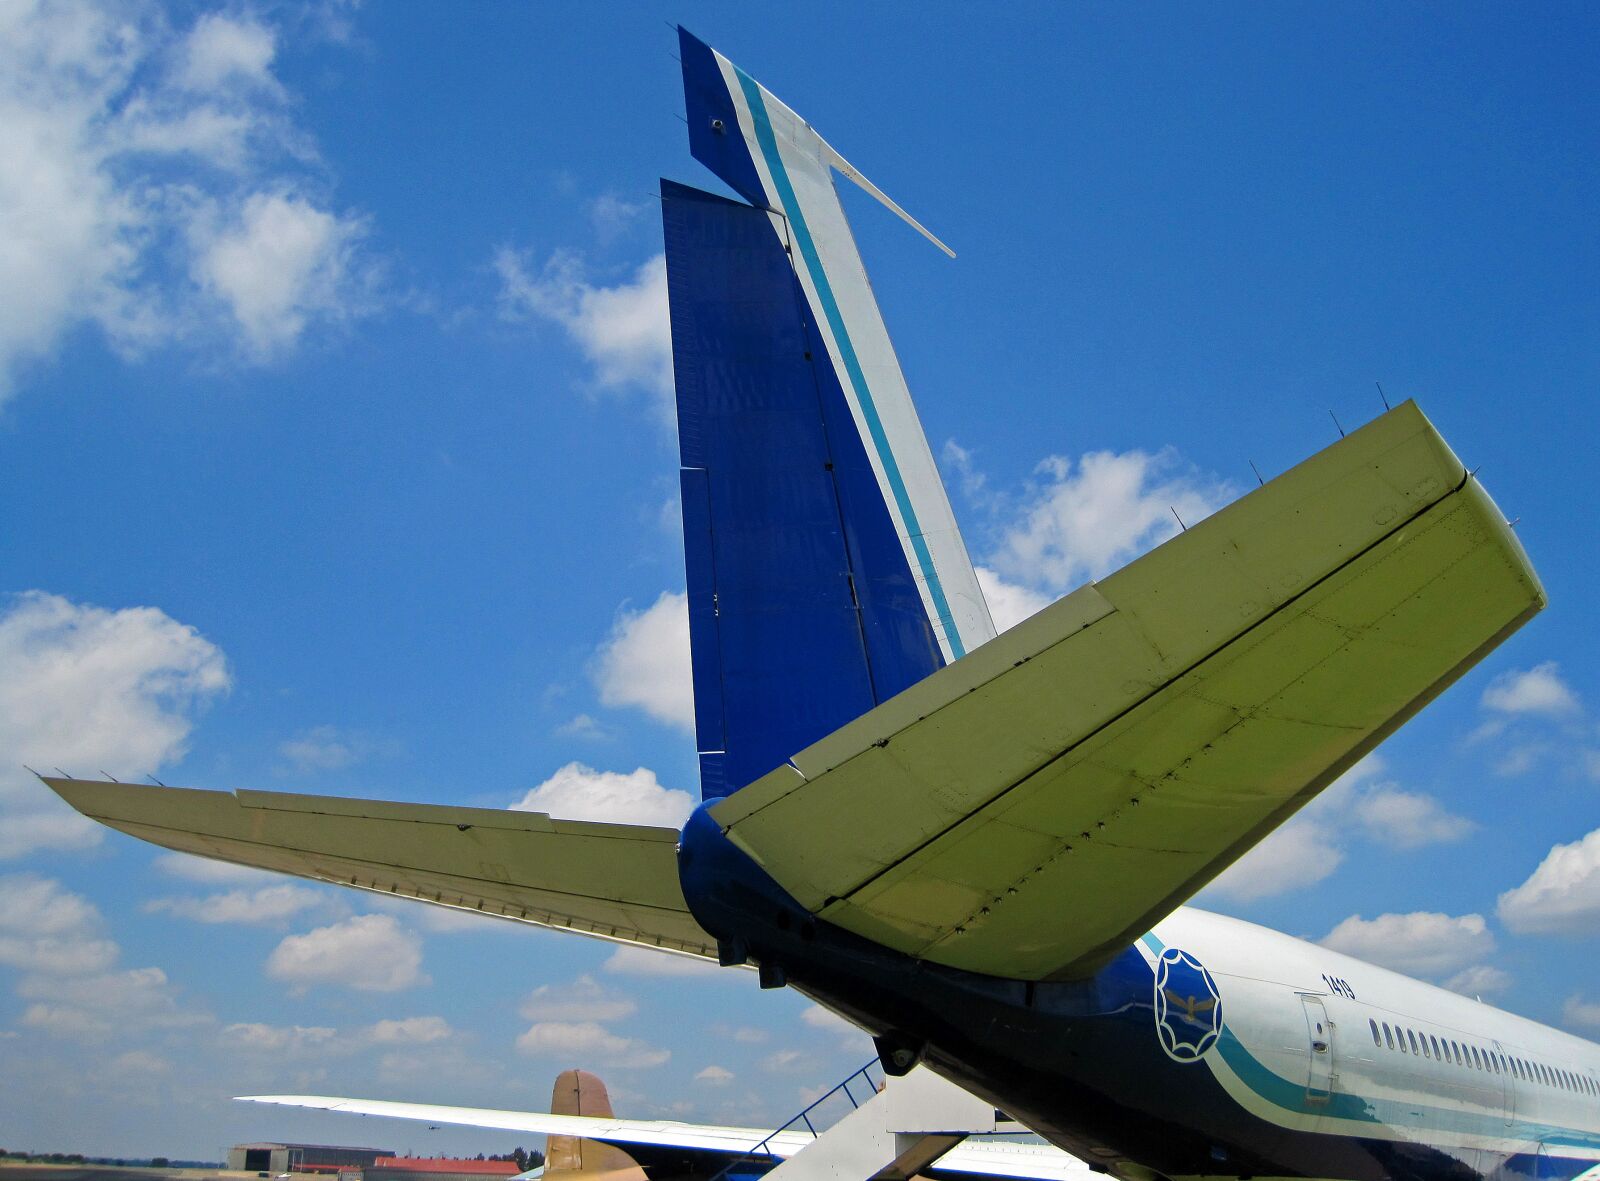 Canon PowerShot SD1200 IS (Digital IXUS 95 IS / IXY Digital 110 IS) sample photo. Tail of b-707, boeing photography